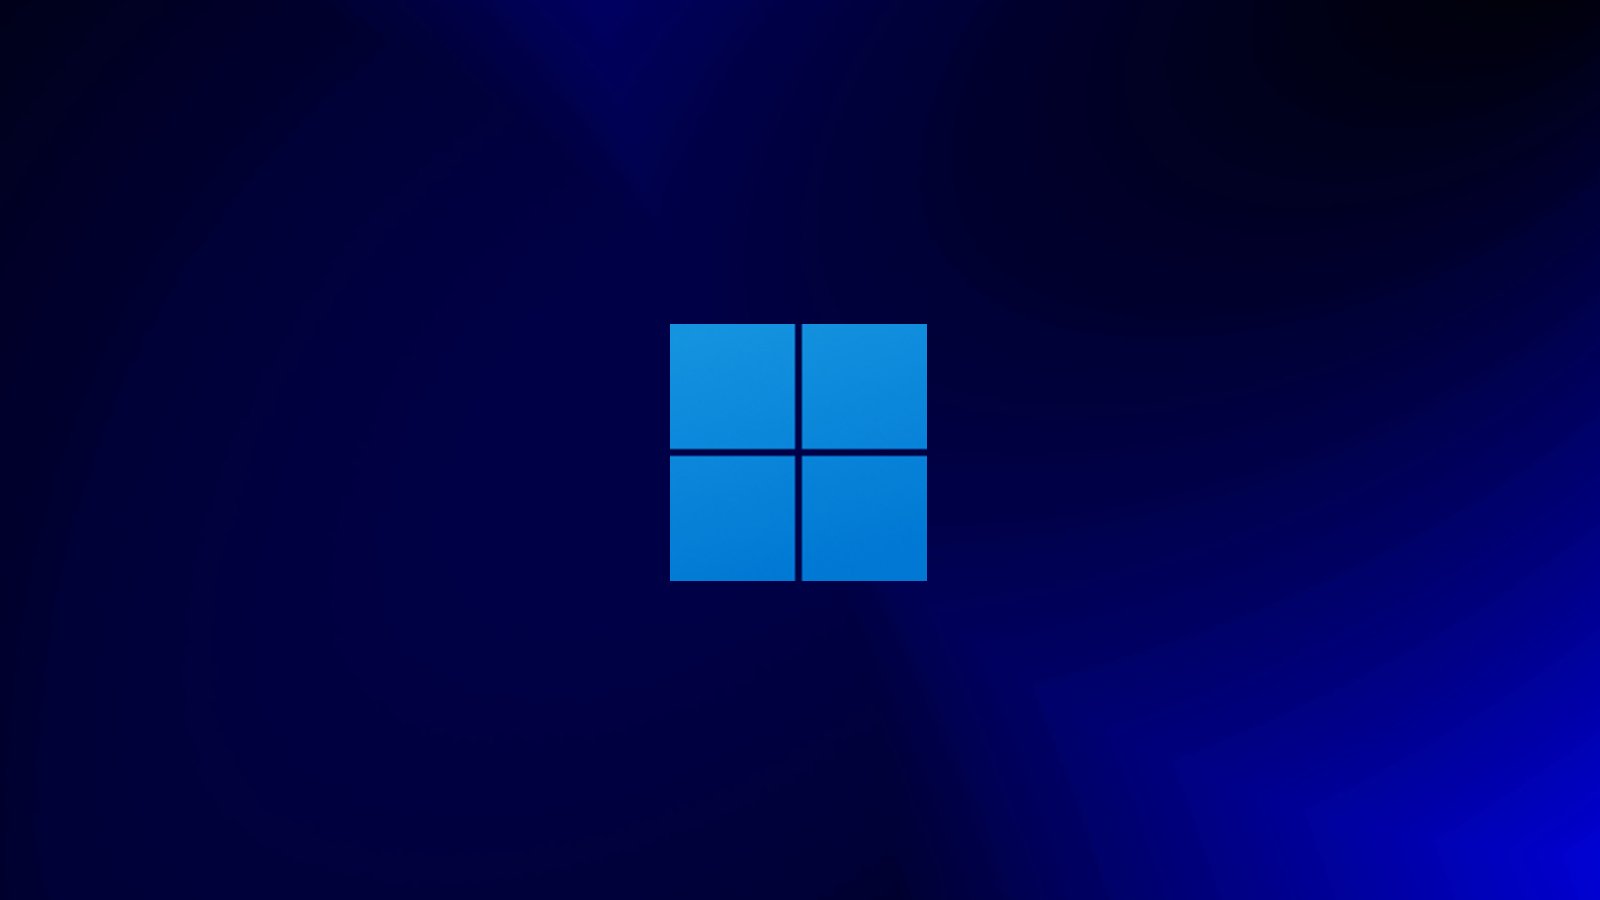 Windows 11 packs a new modern design, fluent icons and new look for ...